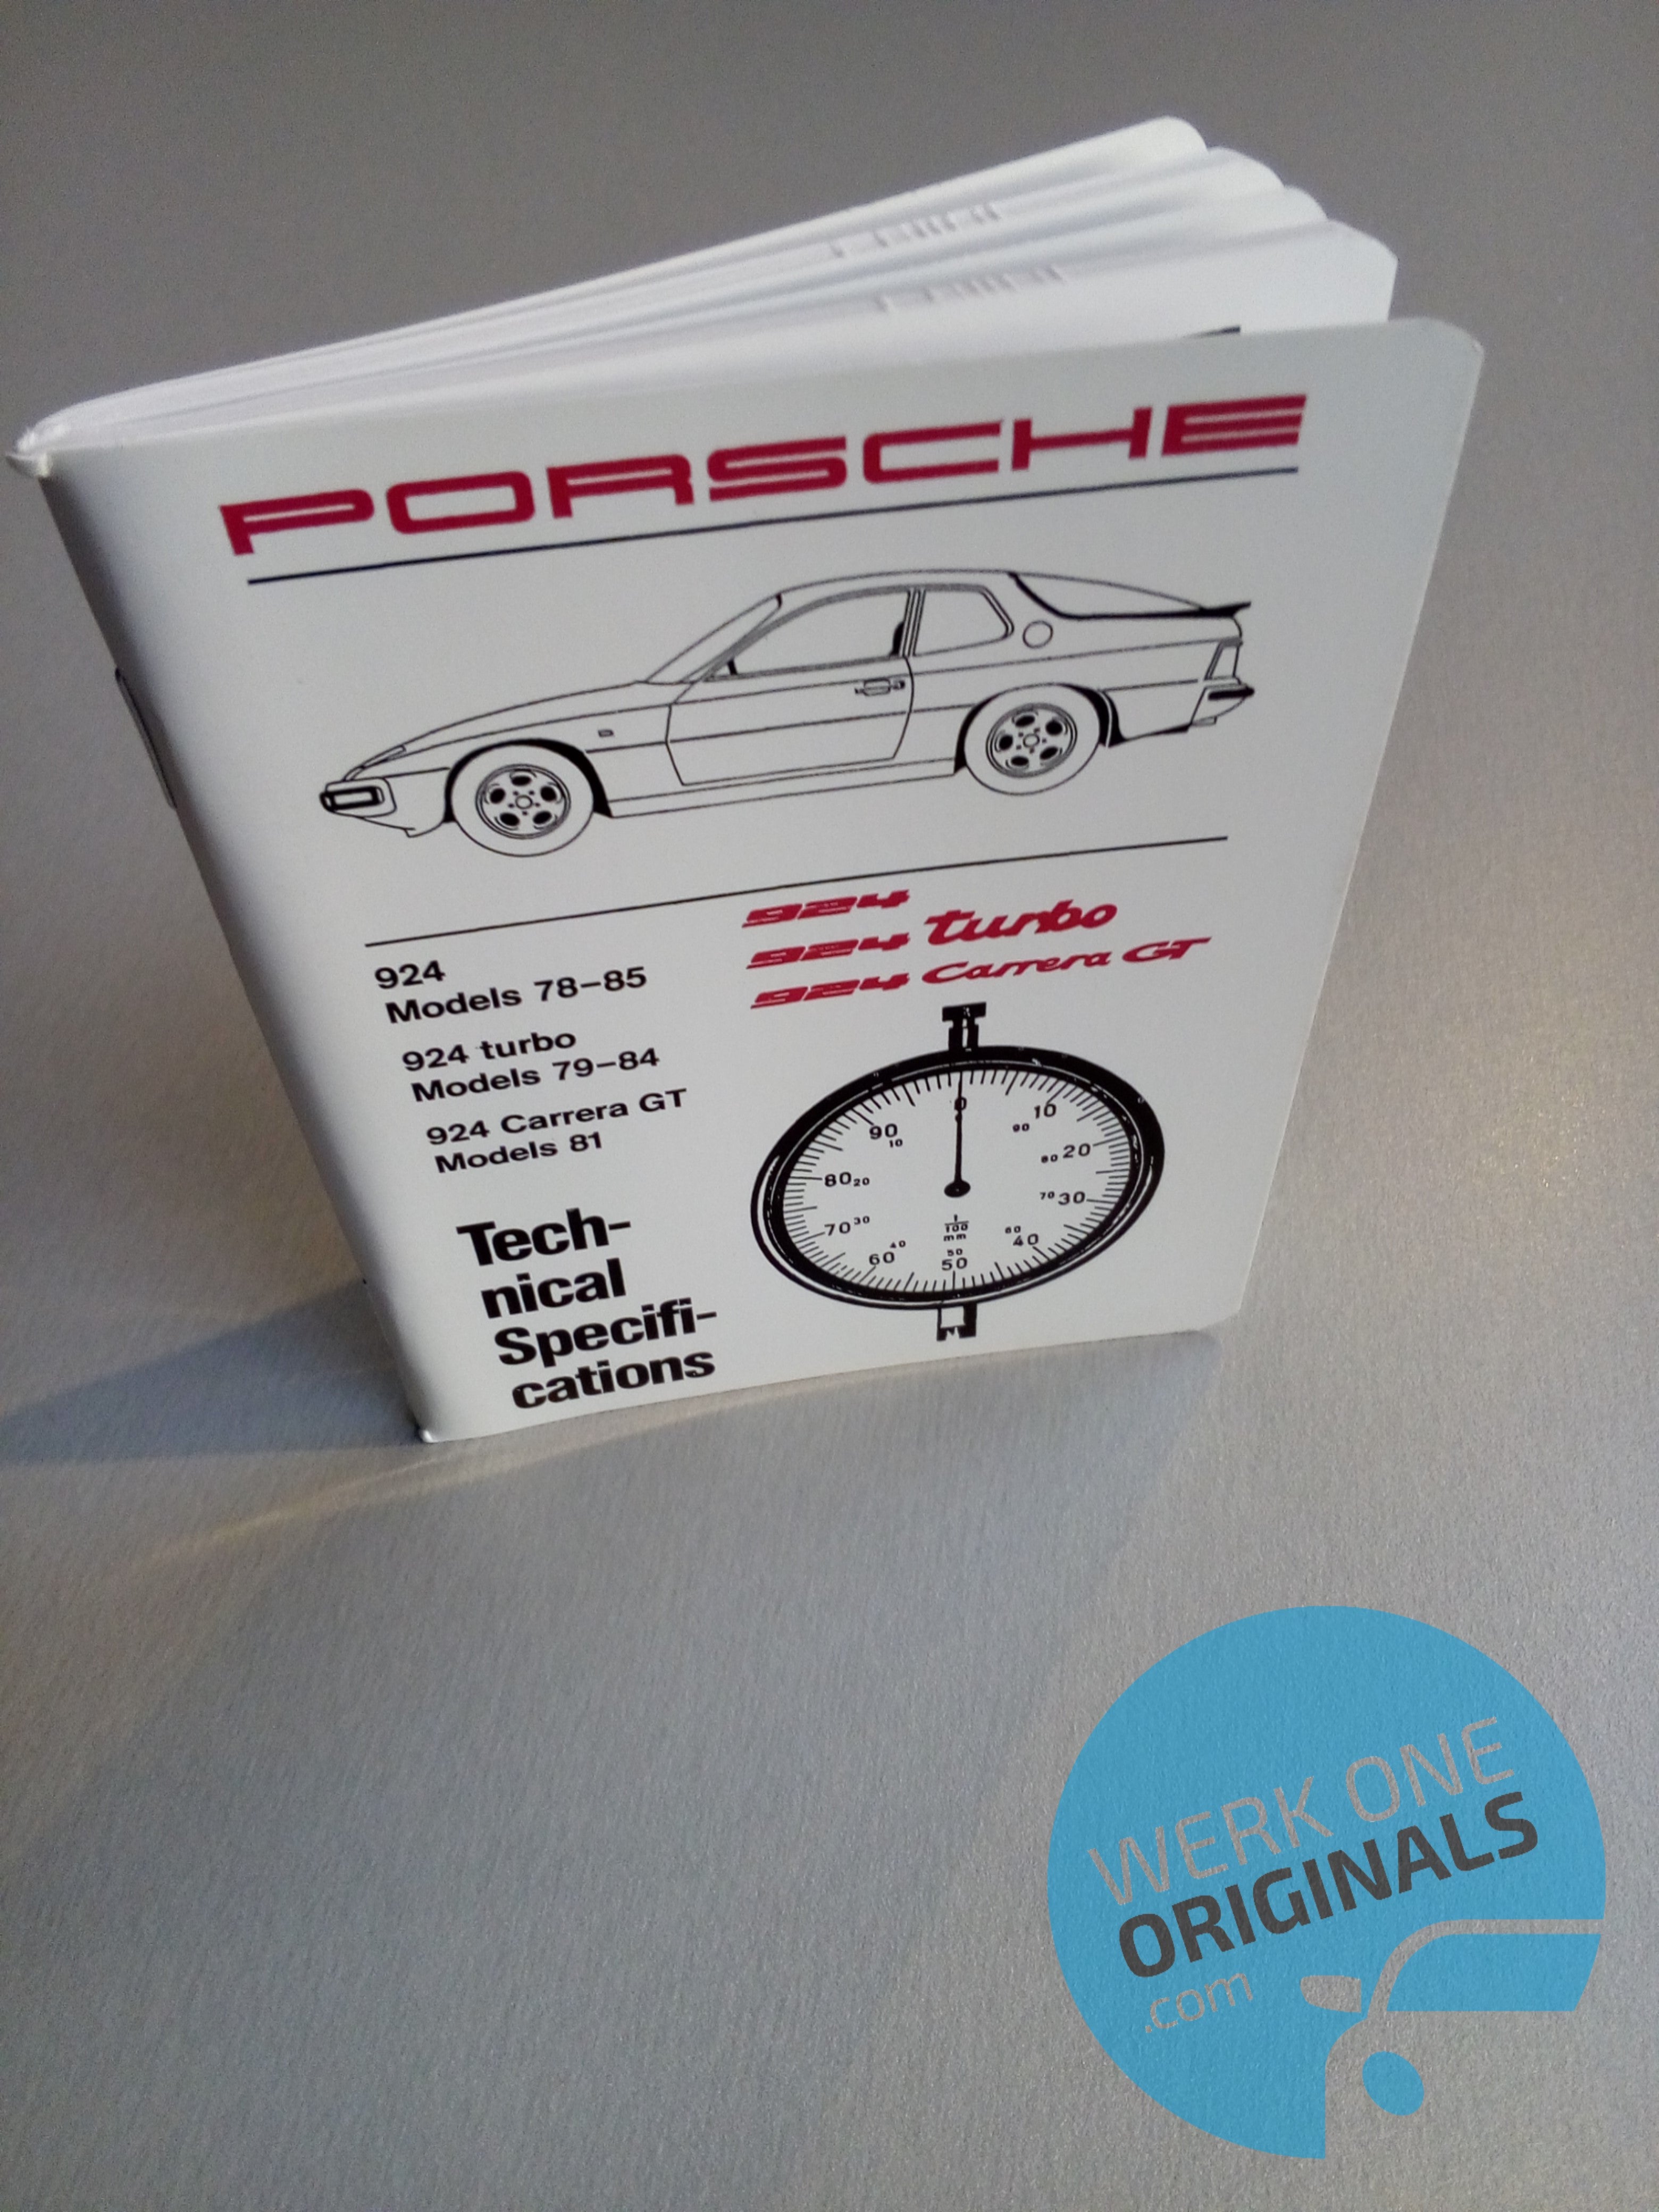 Porsche Technical Specification Manual for 924 Models (1978 - 1985)